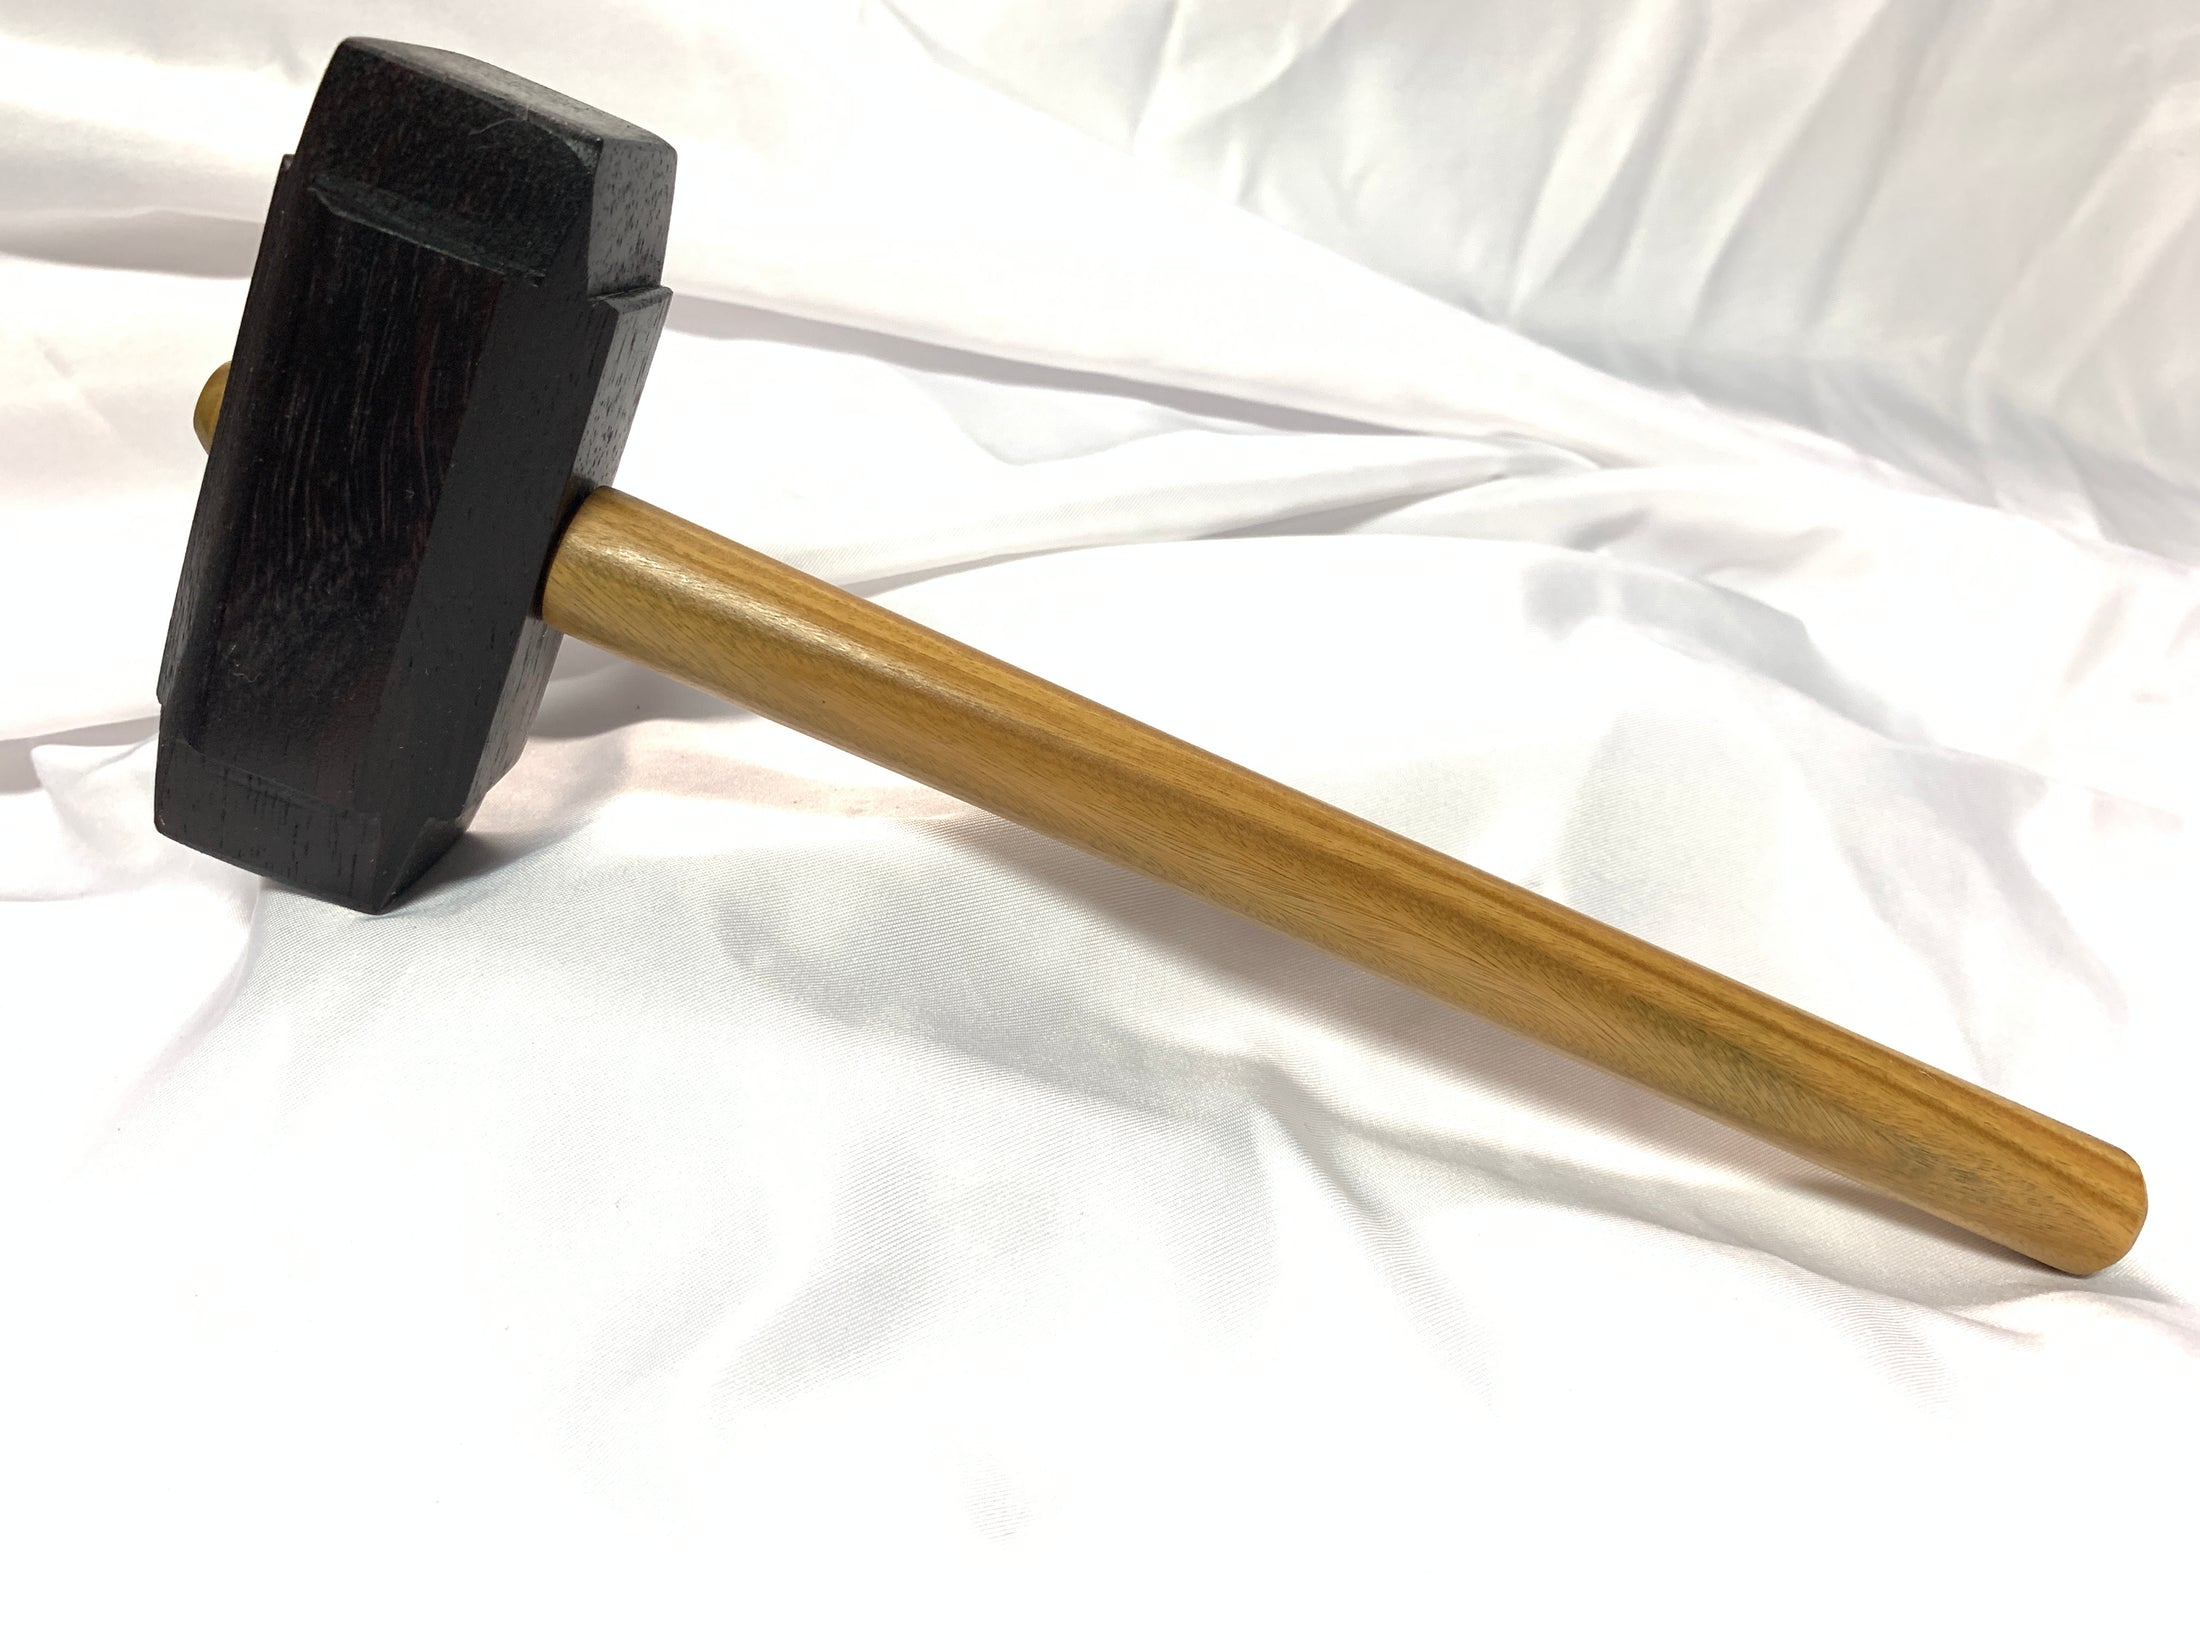 Thors Hammer Woodworking Mallet East Indian Rosewood Head with Lignum Vitae Handle Kings Fine Woodworking